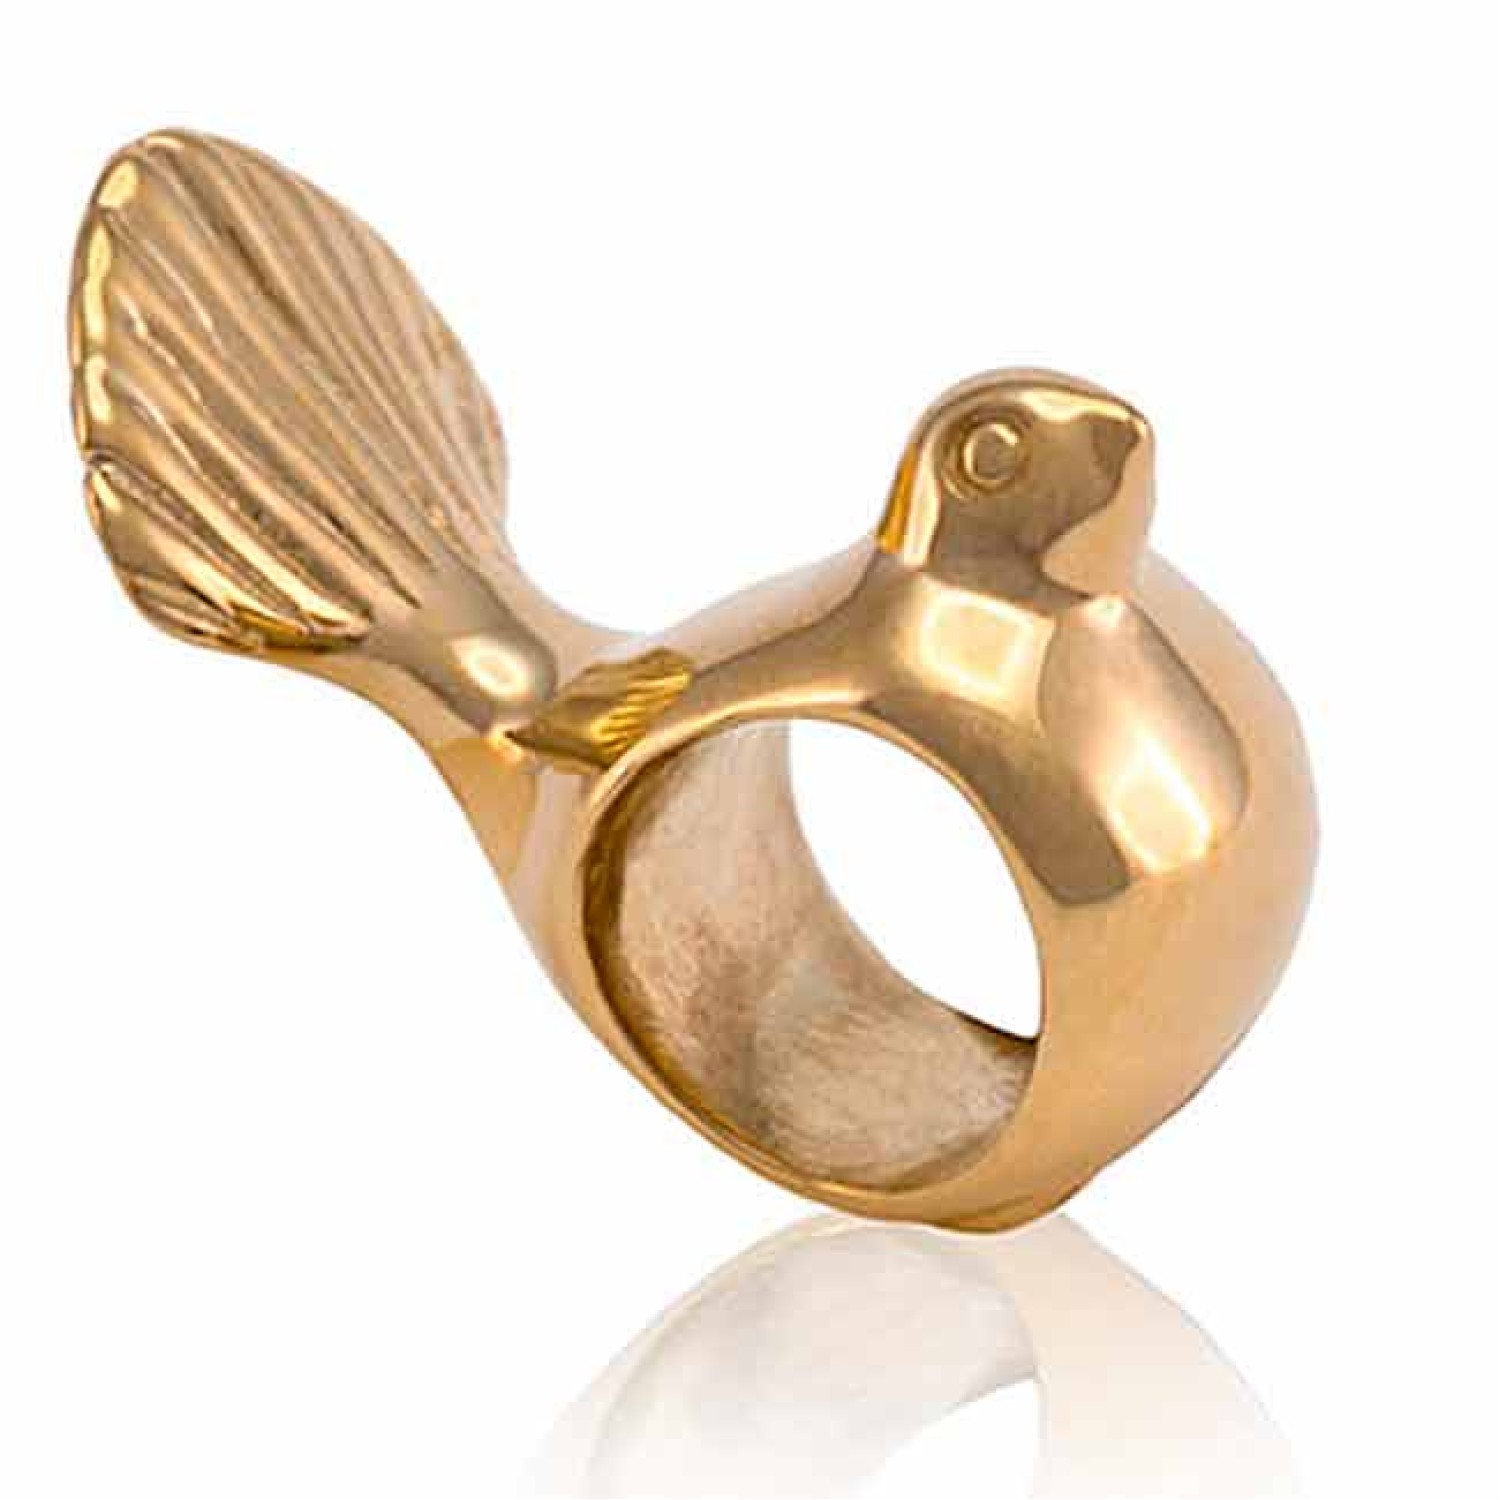 125G Evolve 9ct Gold Charm Fantail. 125G Evolve 9ct Gold Charm Fantail Evolves Fantail charm celebrates one of New Zealand’s most treasured native birds. The unique and curious fantail (piwakawaka in Maori) is respected as a symbolic messenger. @christies